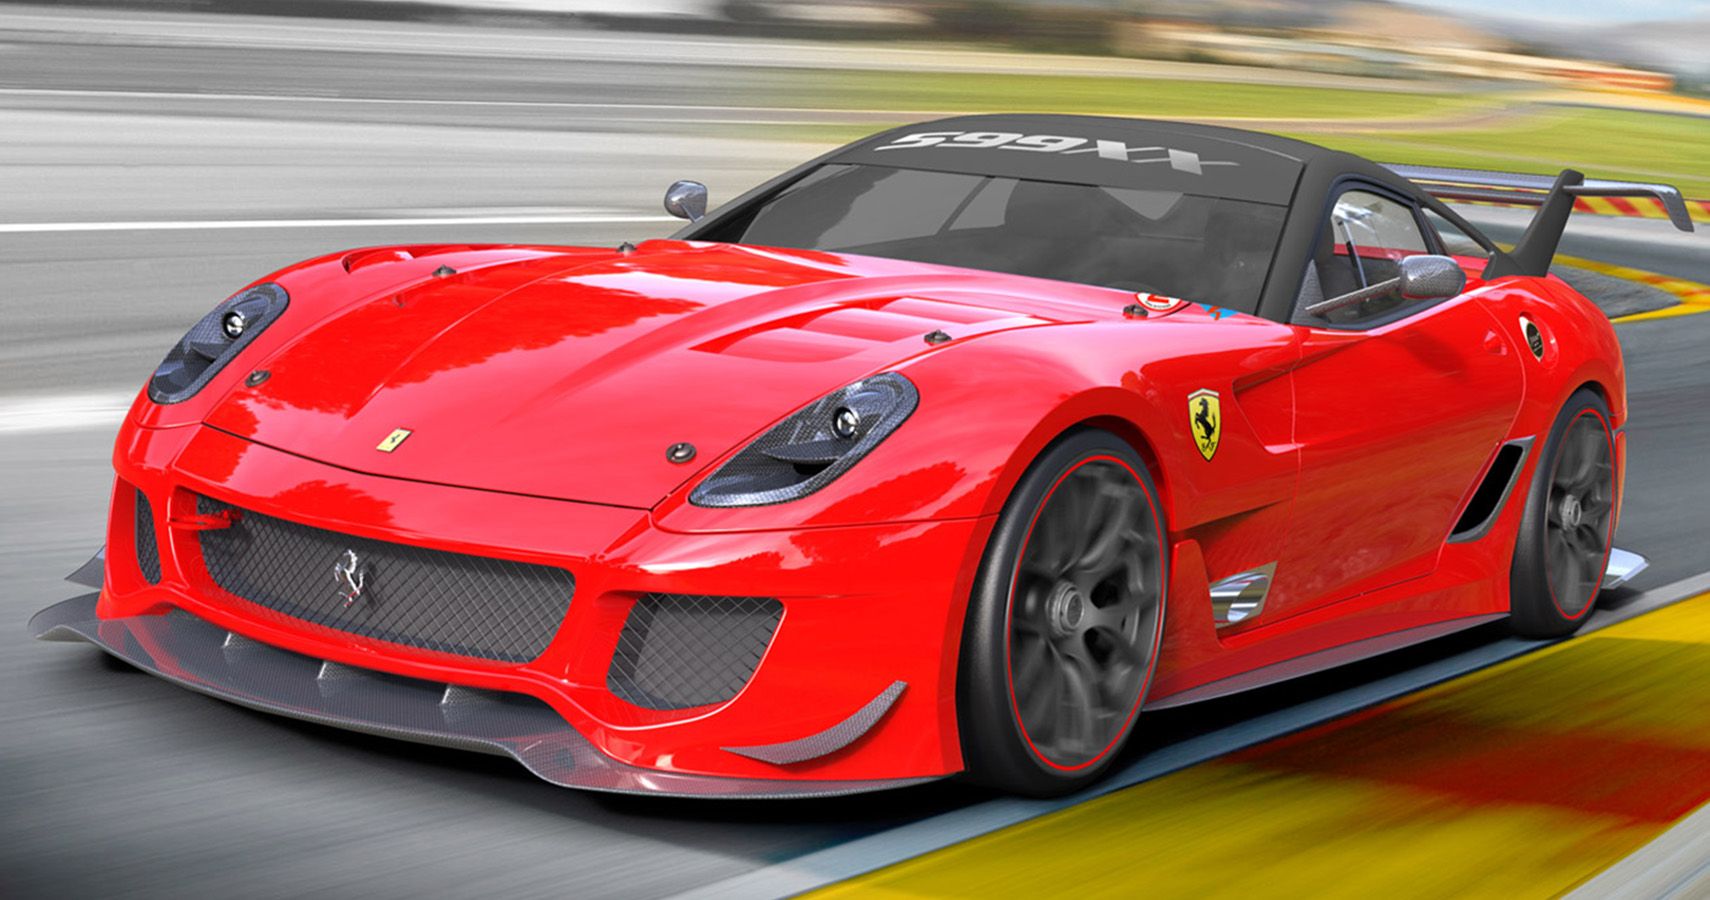 The 599XX Evo Is Not A New Car, Its An Upgrade Package Available On The 599XX